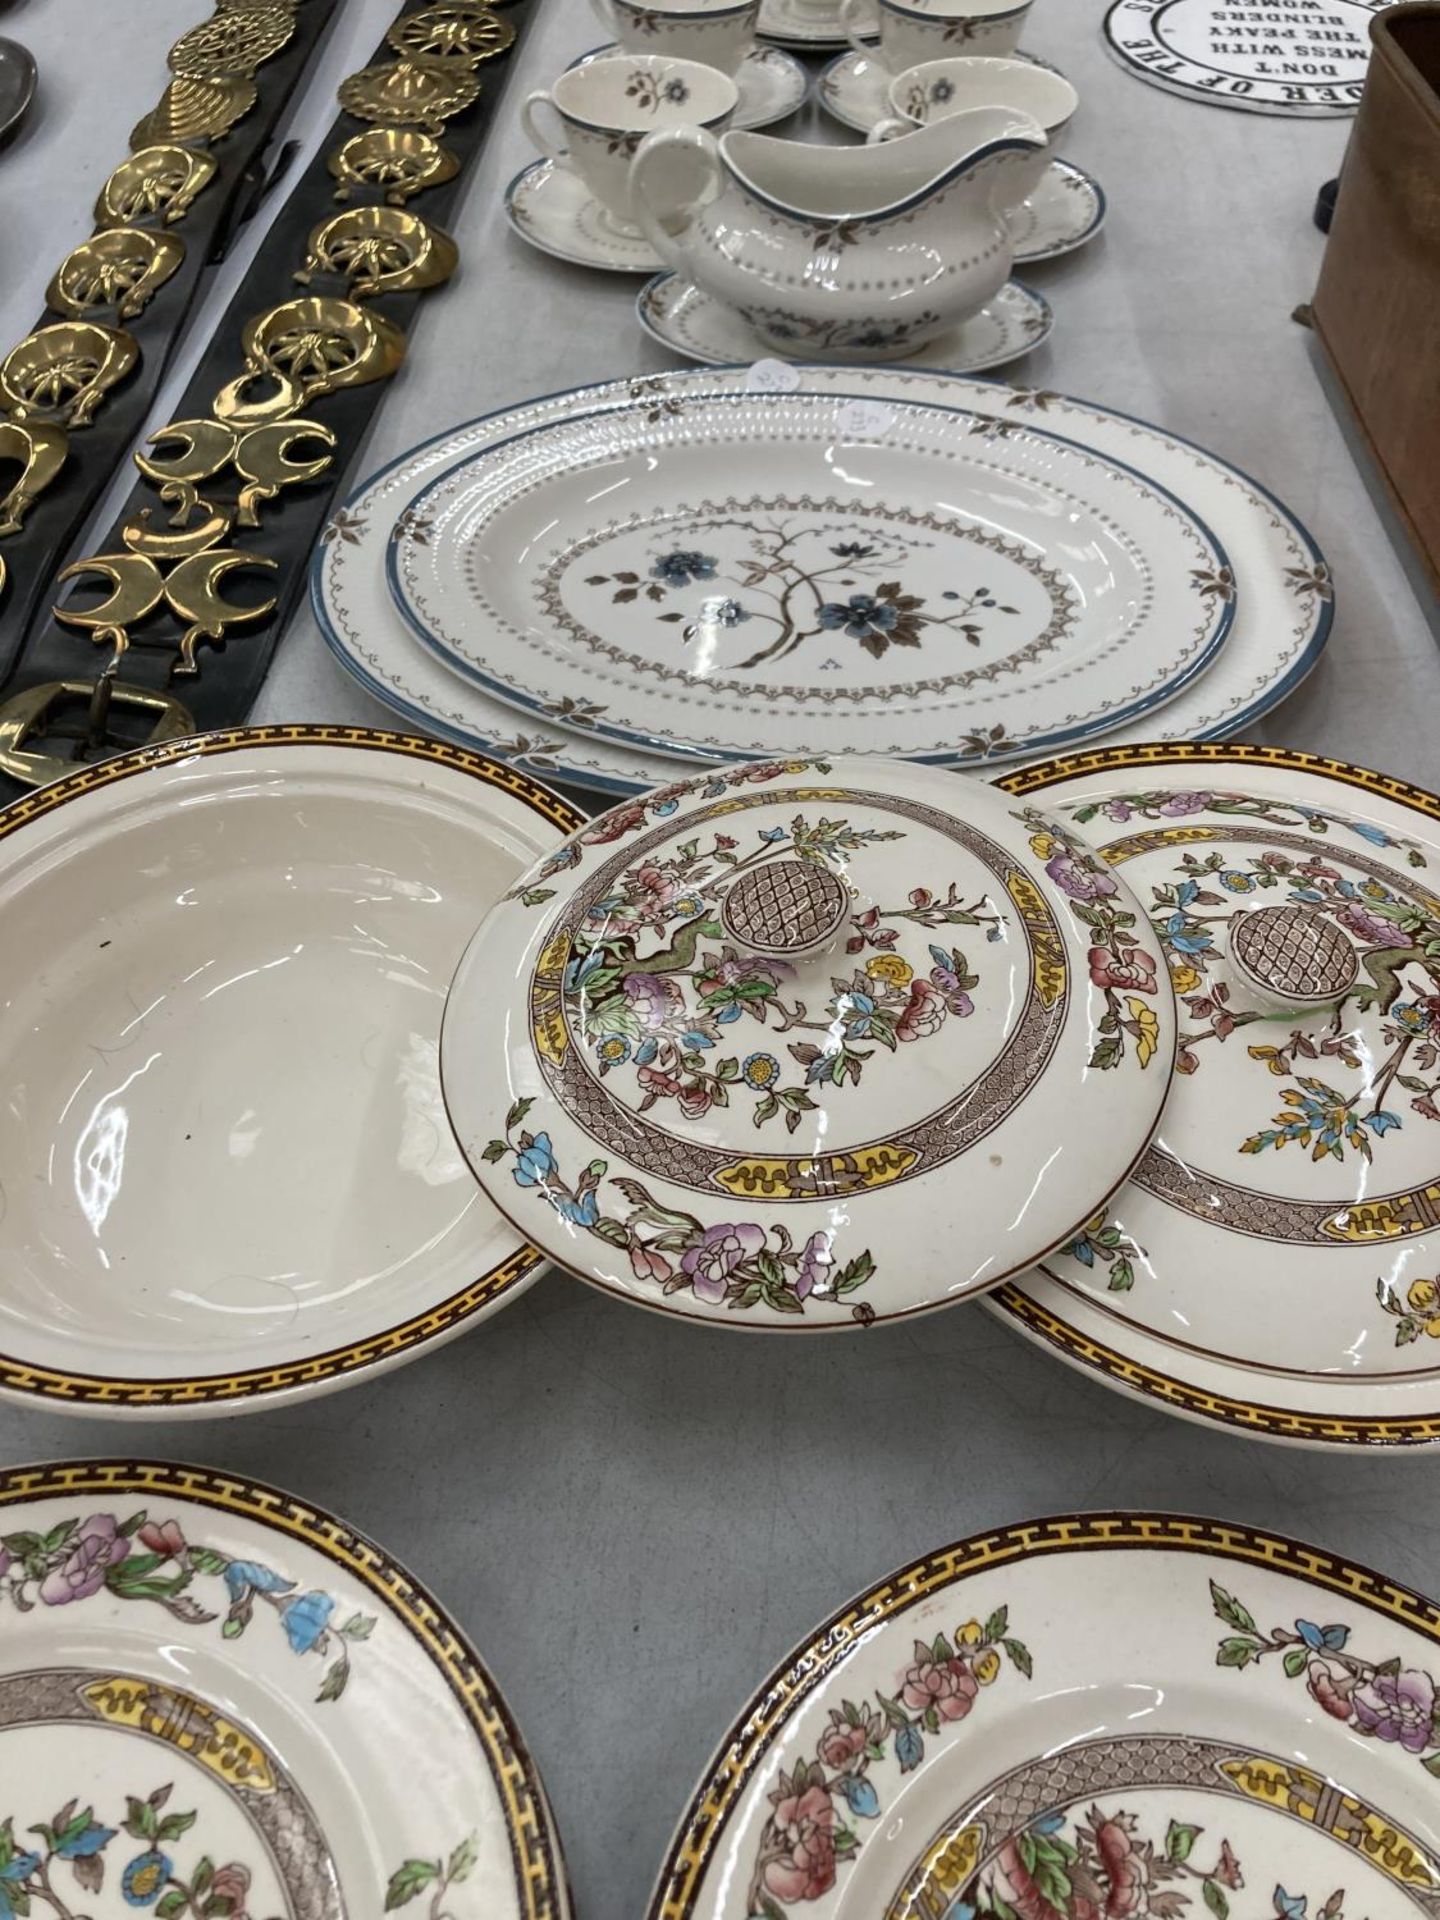 A QUANTITY OF WASHINGTON 'INDIAN TREE' DINNERWARE TO INCLUDE PLATES, BOWLS, TUREEN, SAUCE BOAT, ETC - Image 3 of 6